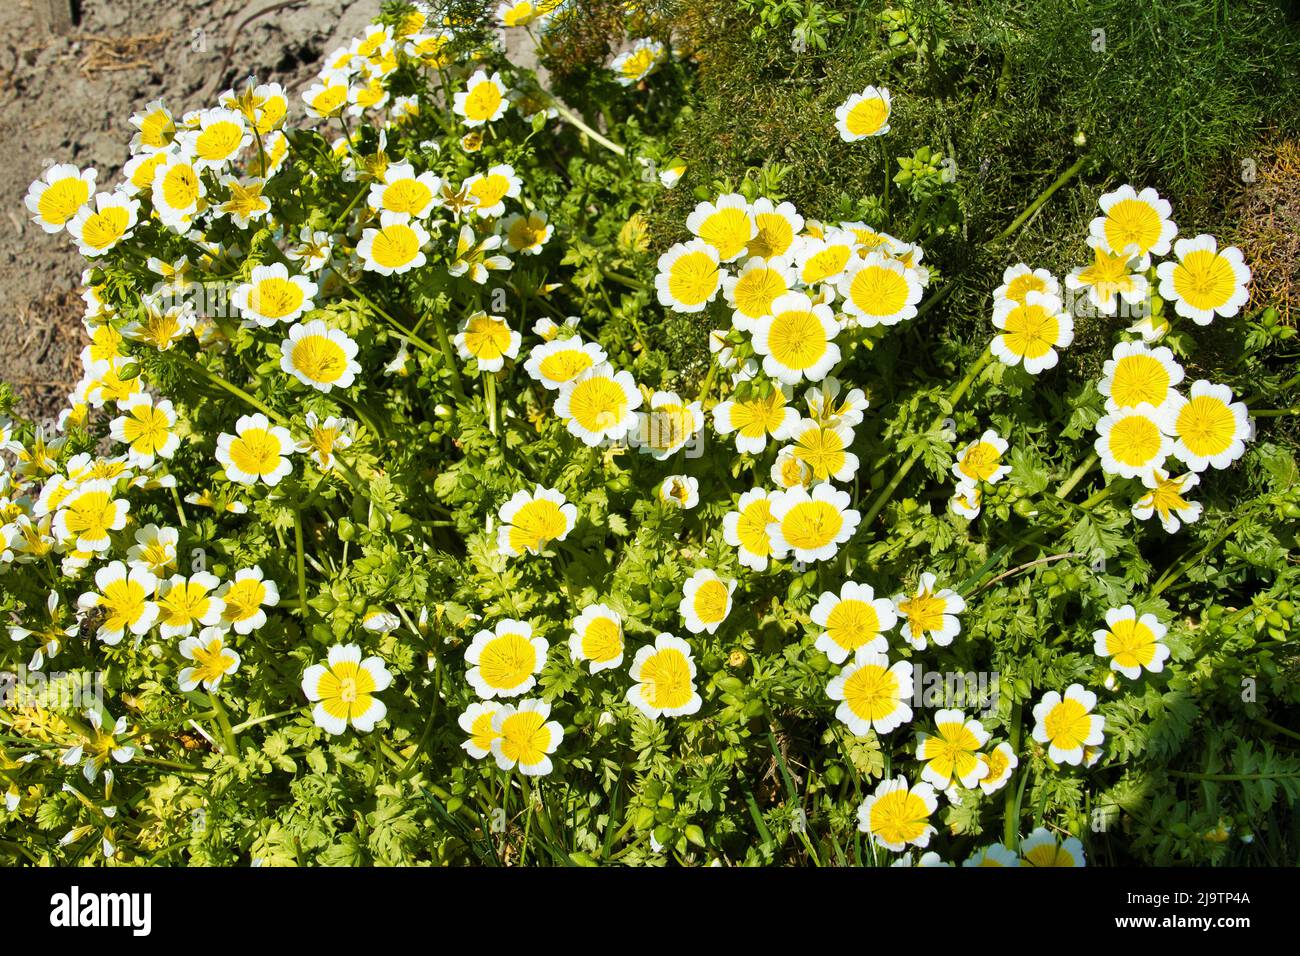 The white and yellow flowers of Douglas' meadowfoam or poached egg plant (Limnanthes douglasii) Stock Photo